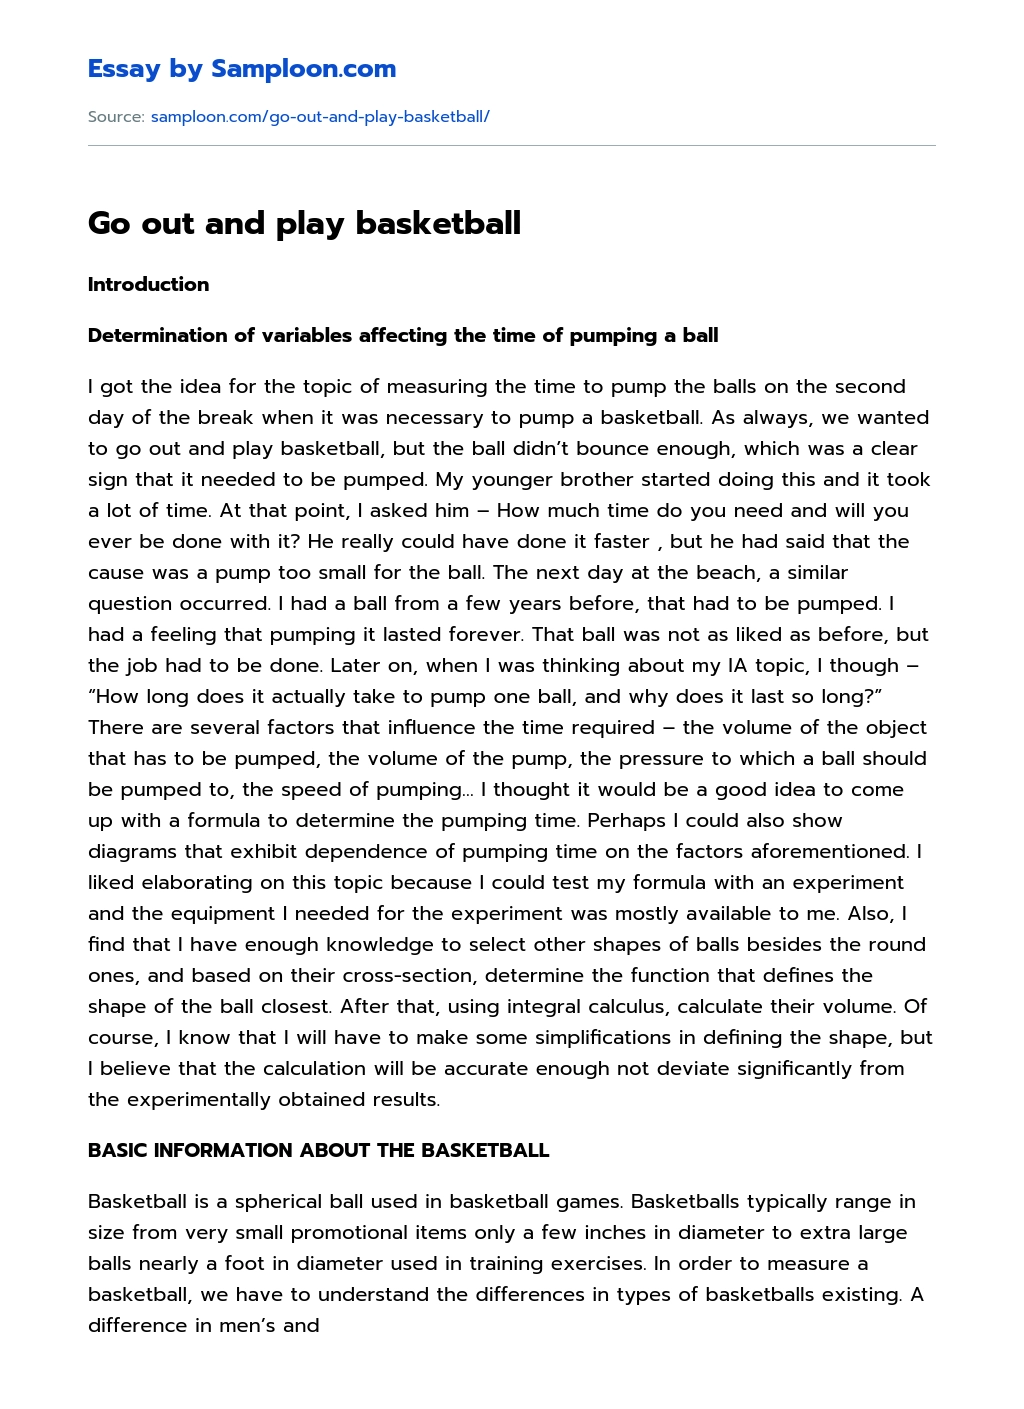 Go out and play basketball essay